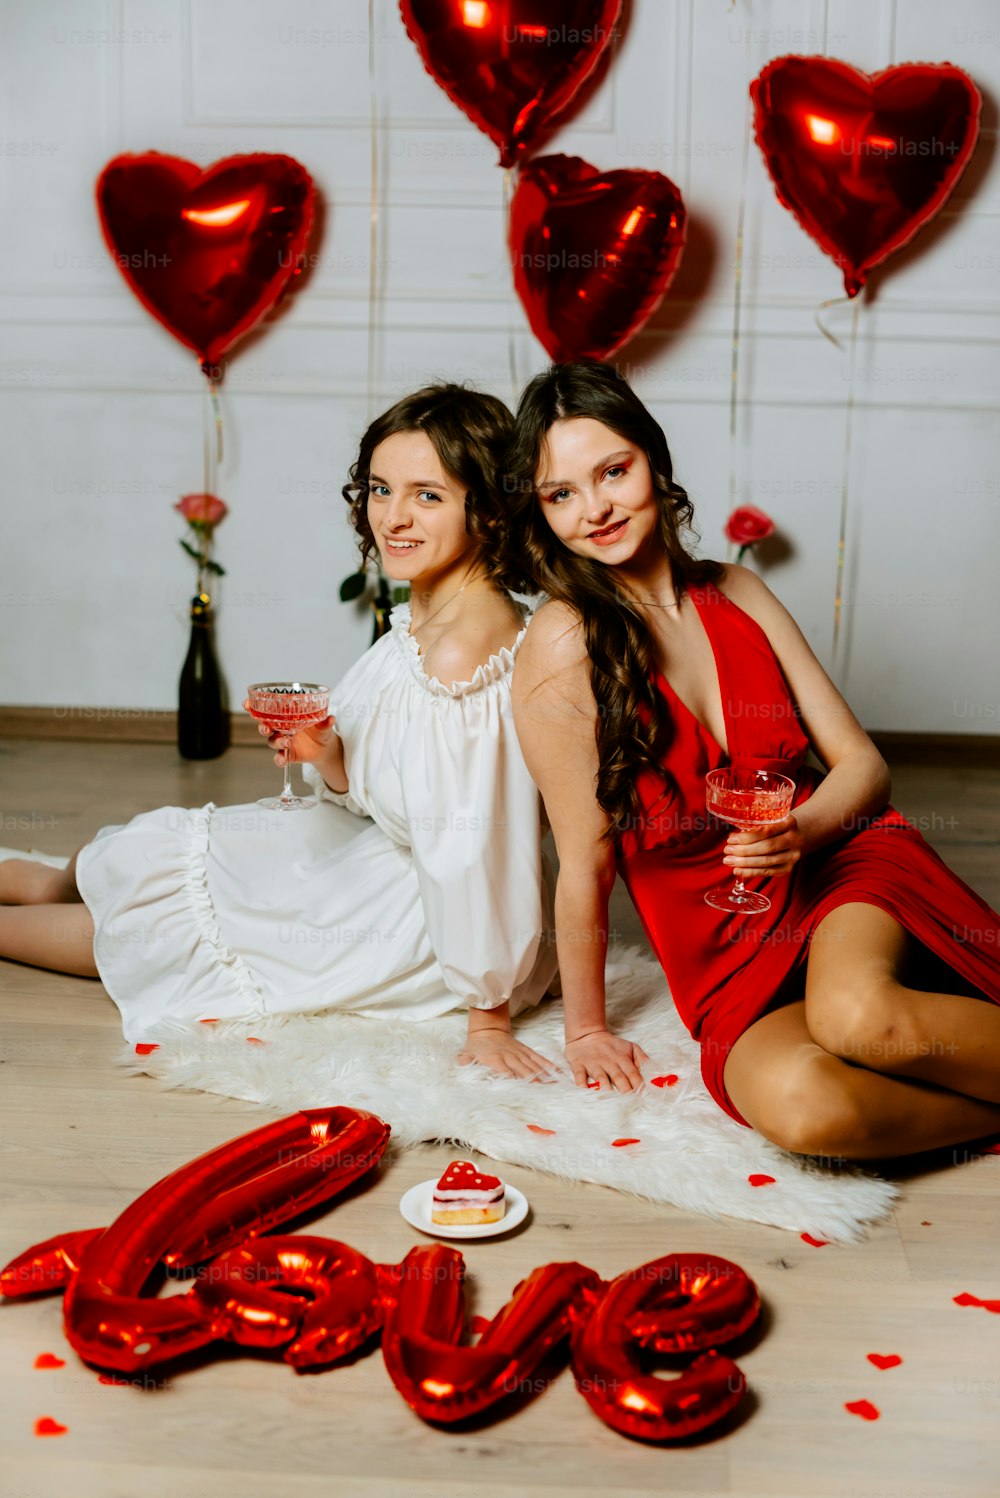 two women sitting on the floor with red balloons